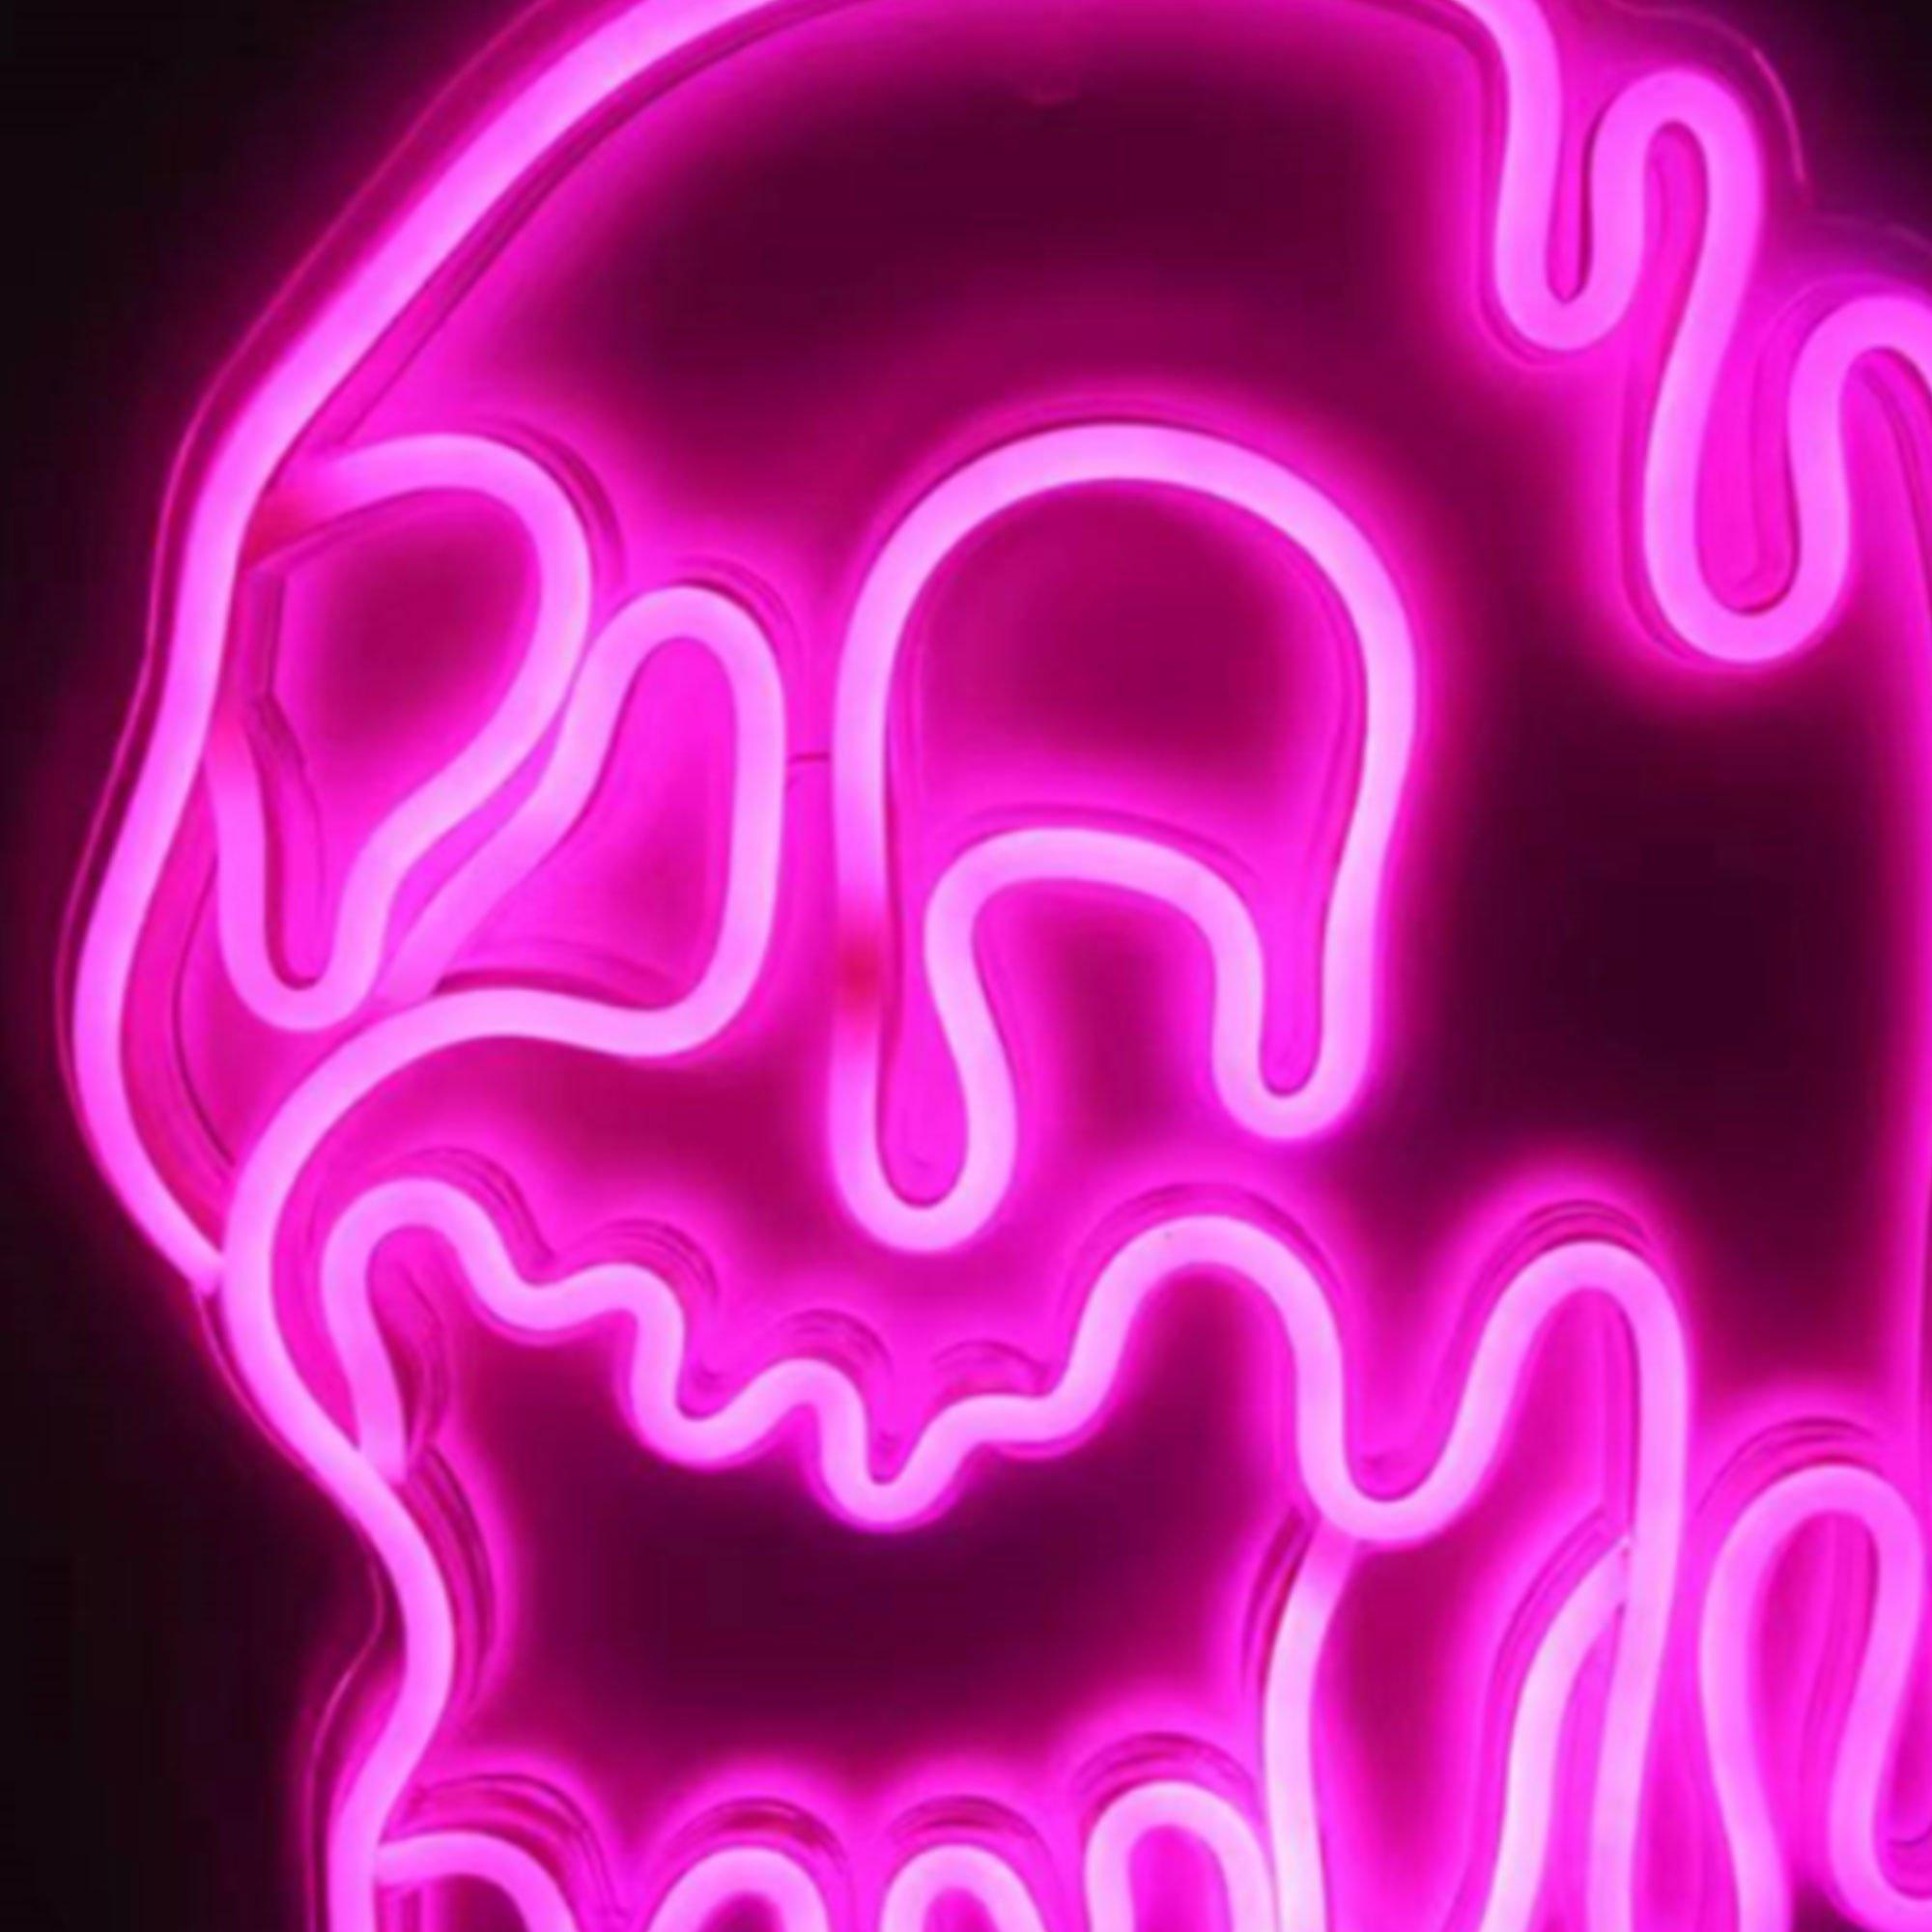 Light-Up Dripping Pink Skull Faux-Neon Sign, 9.8in x 14.5in